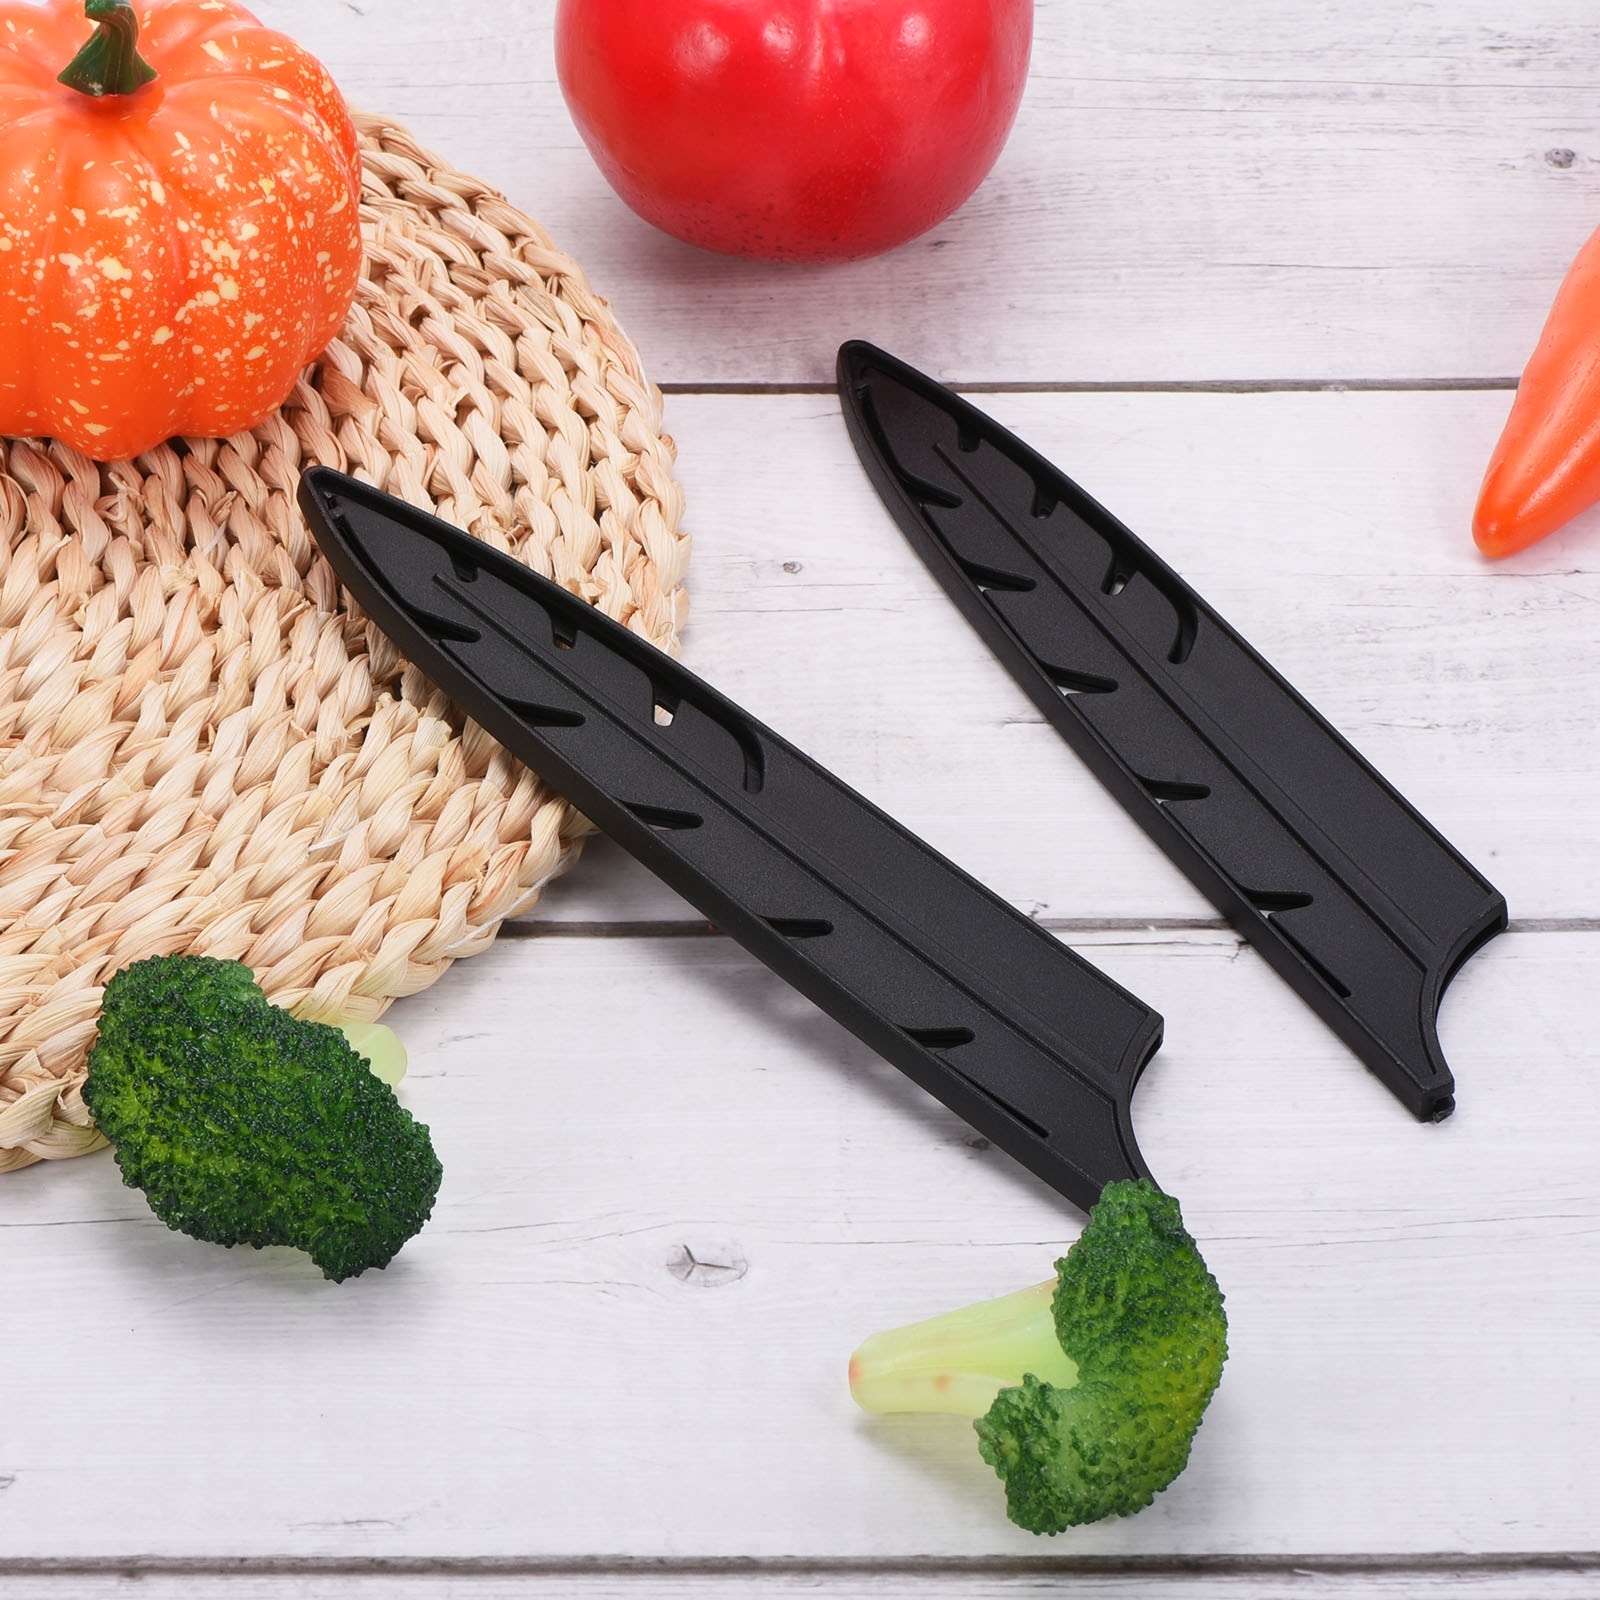 https://ak1.ostkcdn.com/images/products/is/images/direct/06d3322d5dcd77c47f5ec82d0bd353d72a4f68b4/2Pcs-Plastic-Kitchen-Knife-Sheath-Cover-Sleeves-for-8%22-Carving-Knife.jpg